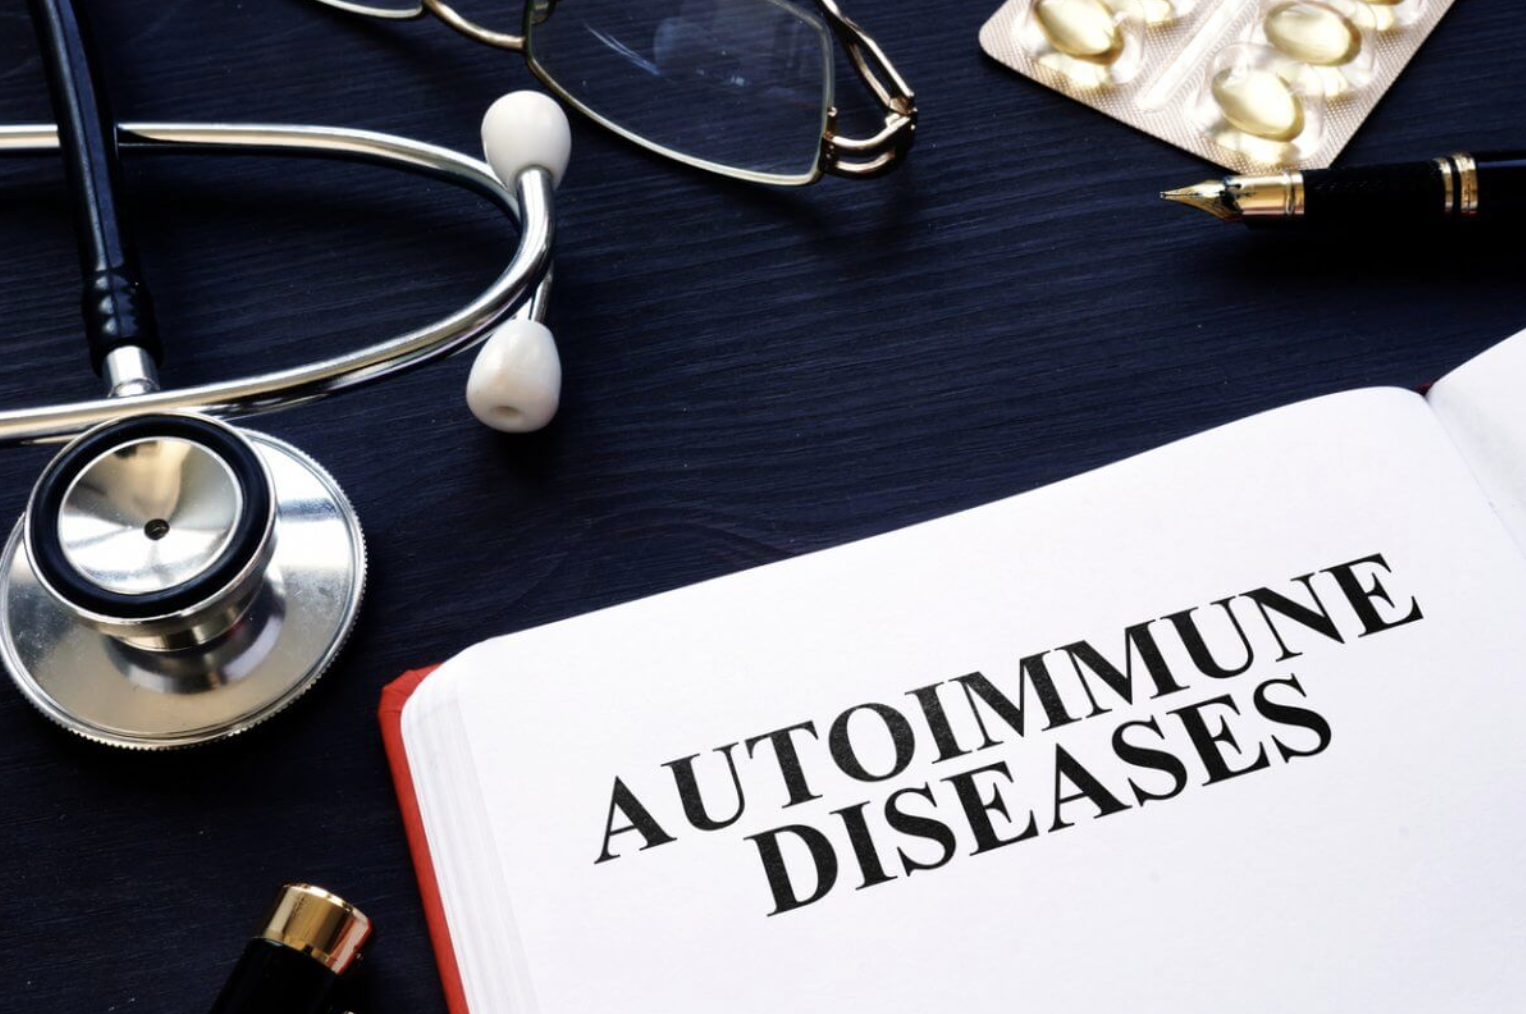 Book with the title Autoimmune Diseases surrounded by medical equipment and fish oils